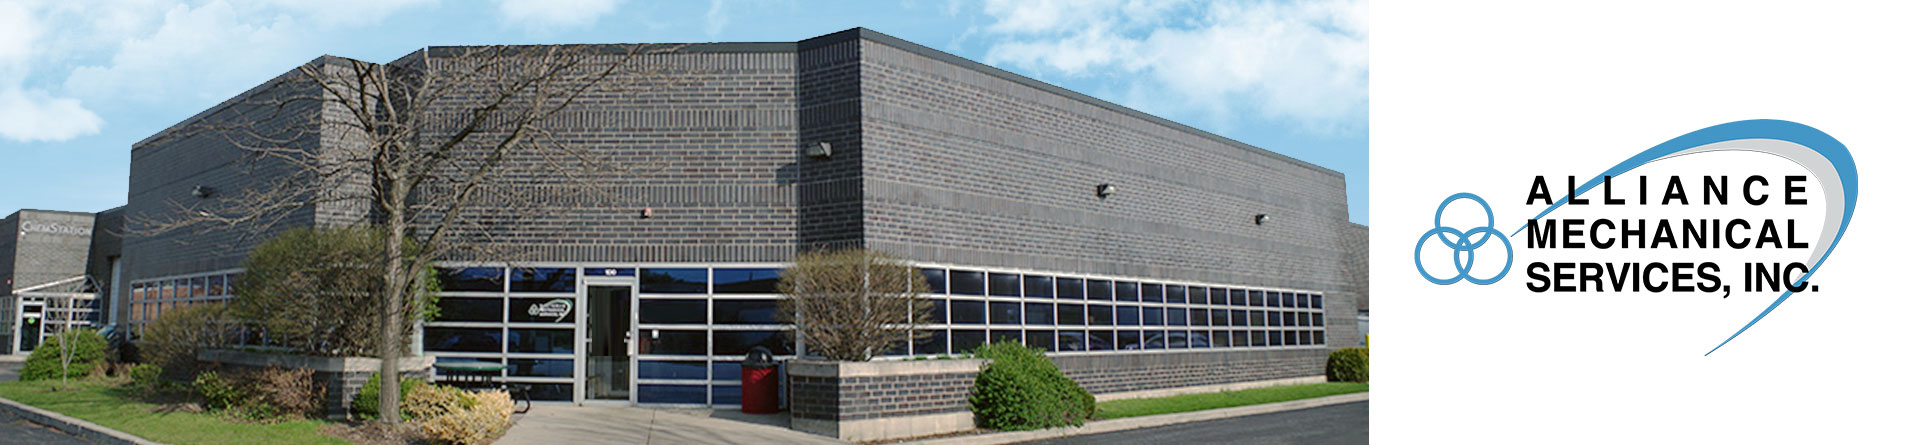 Alliance Mechanical Services headquarters located at 100 Frontier Way Bensenville IL 60106